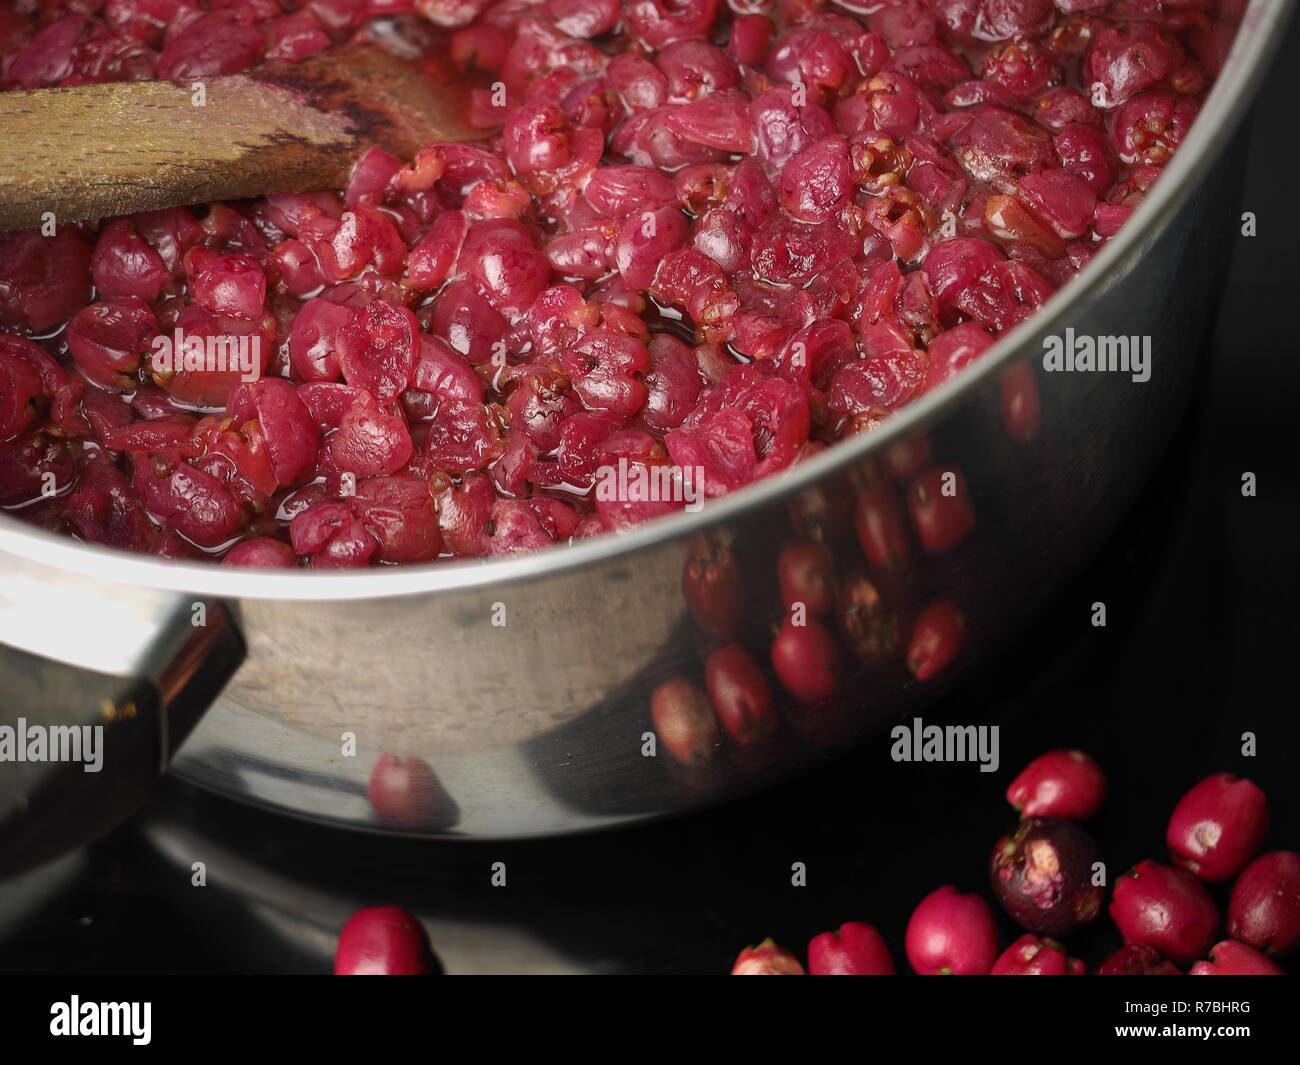 Australian bushtucker Lilly Pilly being made into Lilly Pilly jam. An Australian native wild fruit that is edible and beautiful. Stock Photo